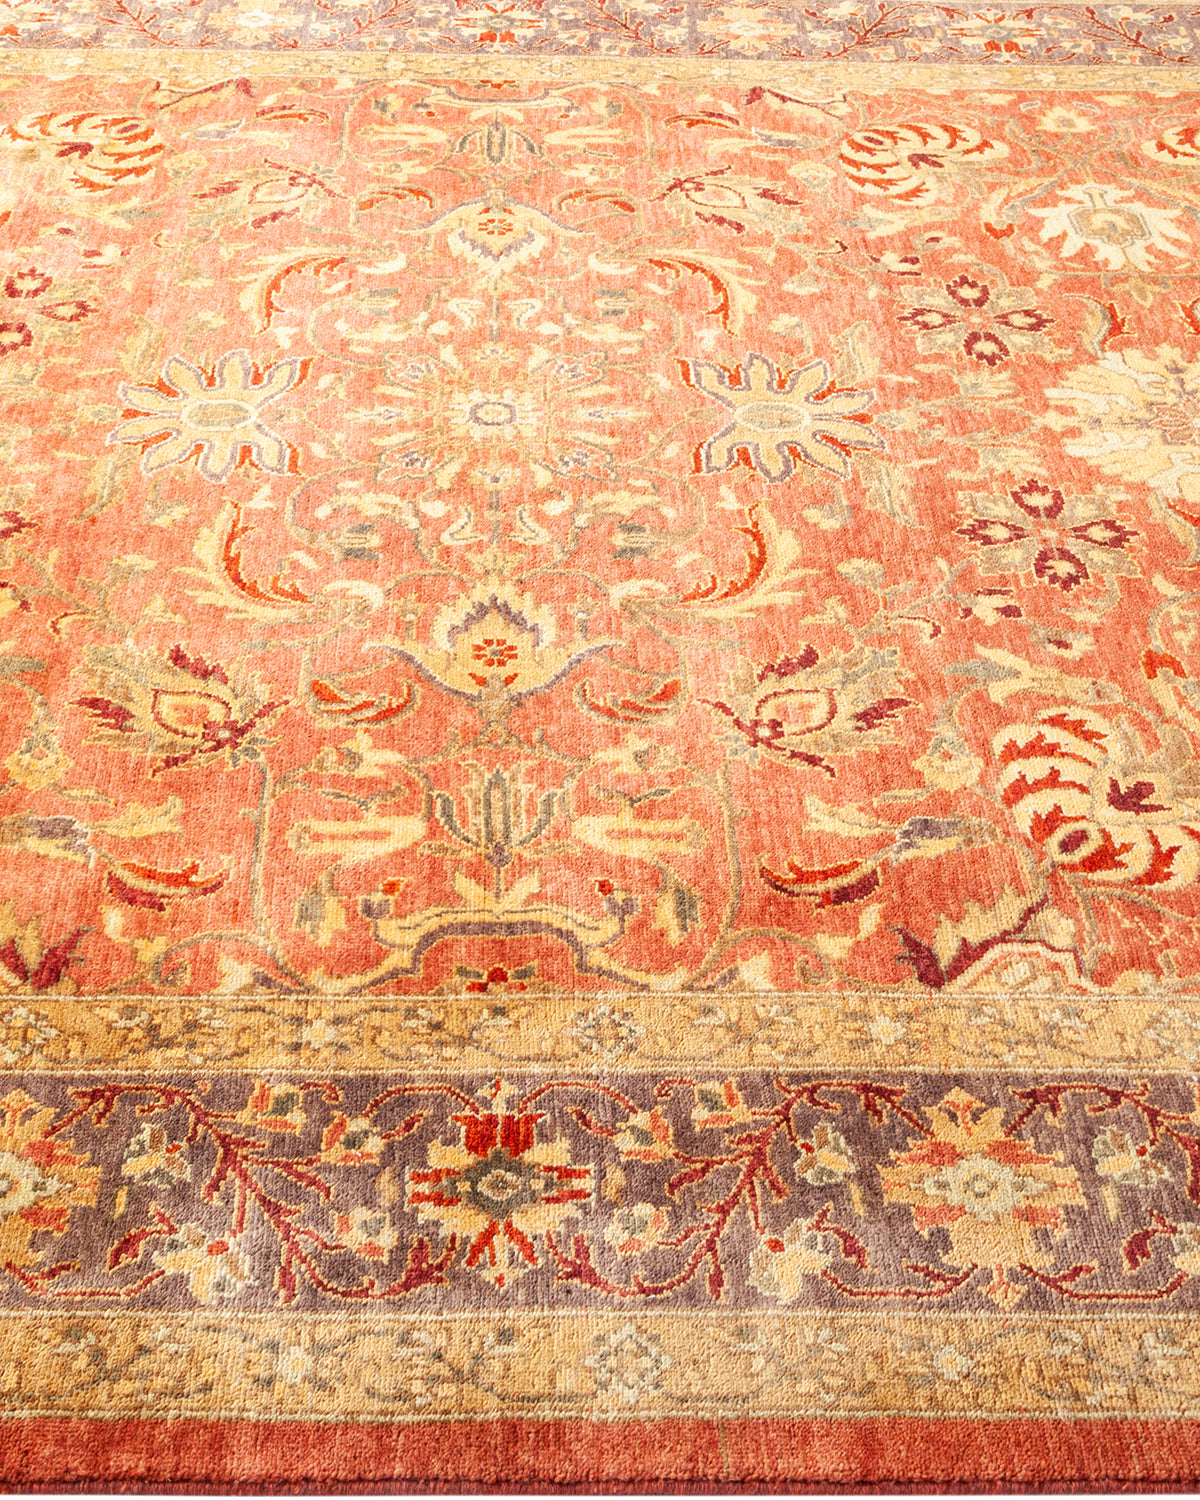 Eclectic, One-of-a-Kind Hand-Knotted Area Rug  - Pink,  6' 2" x 8' 10"